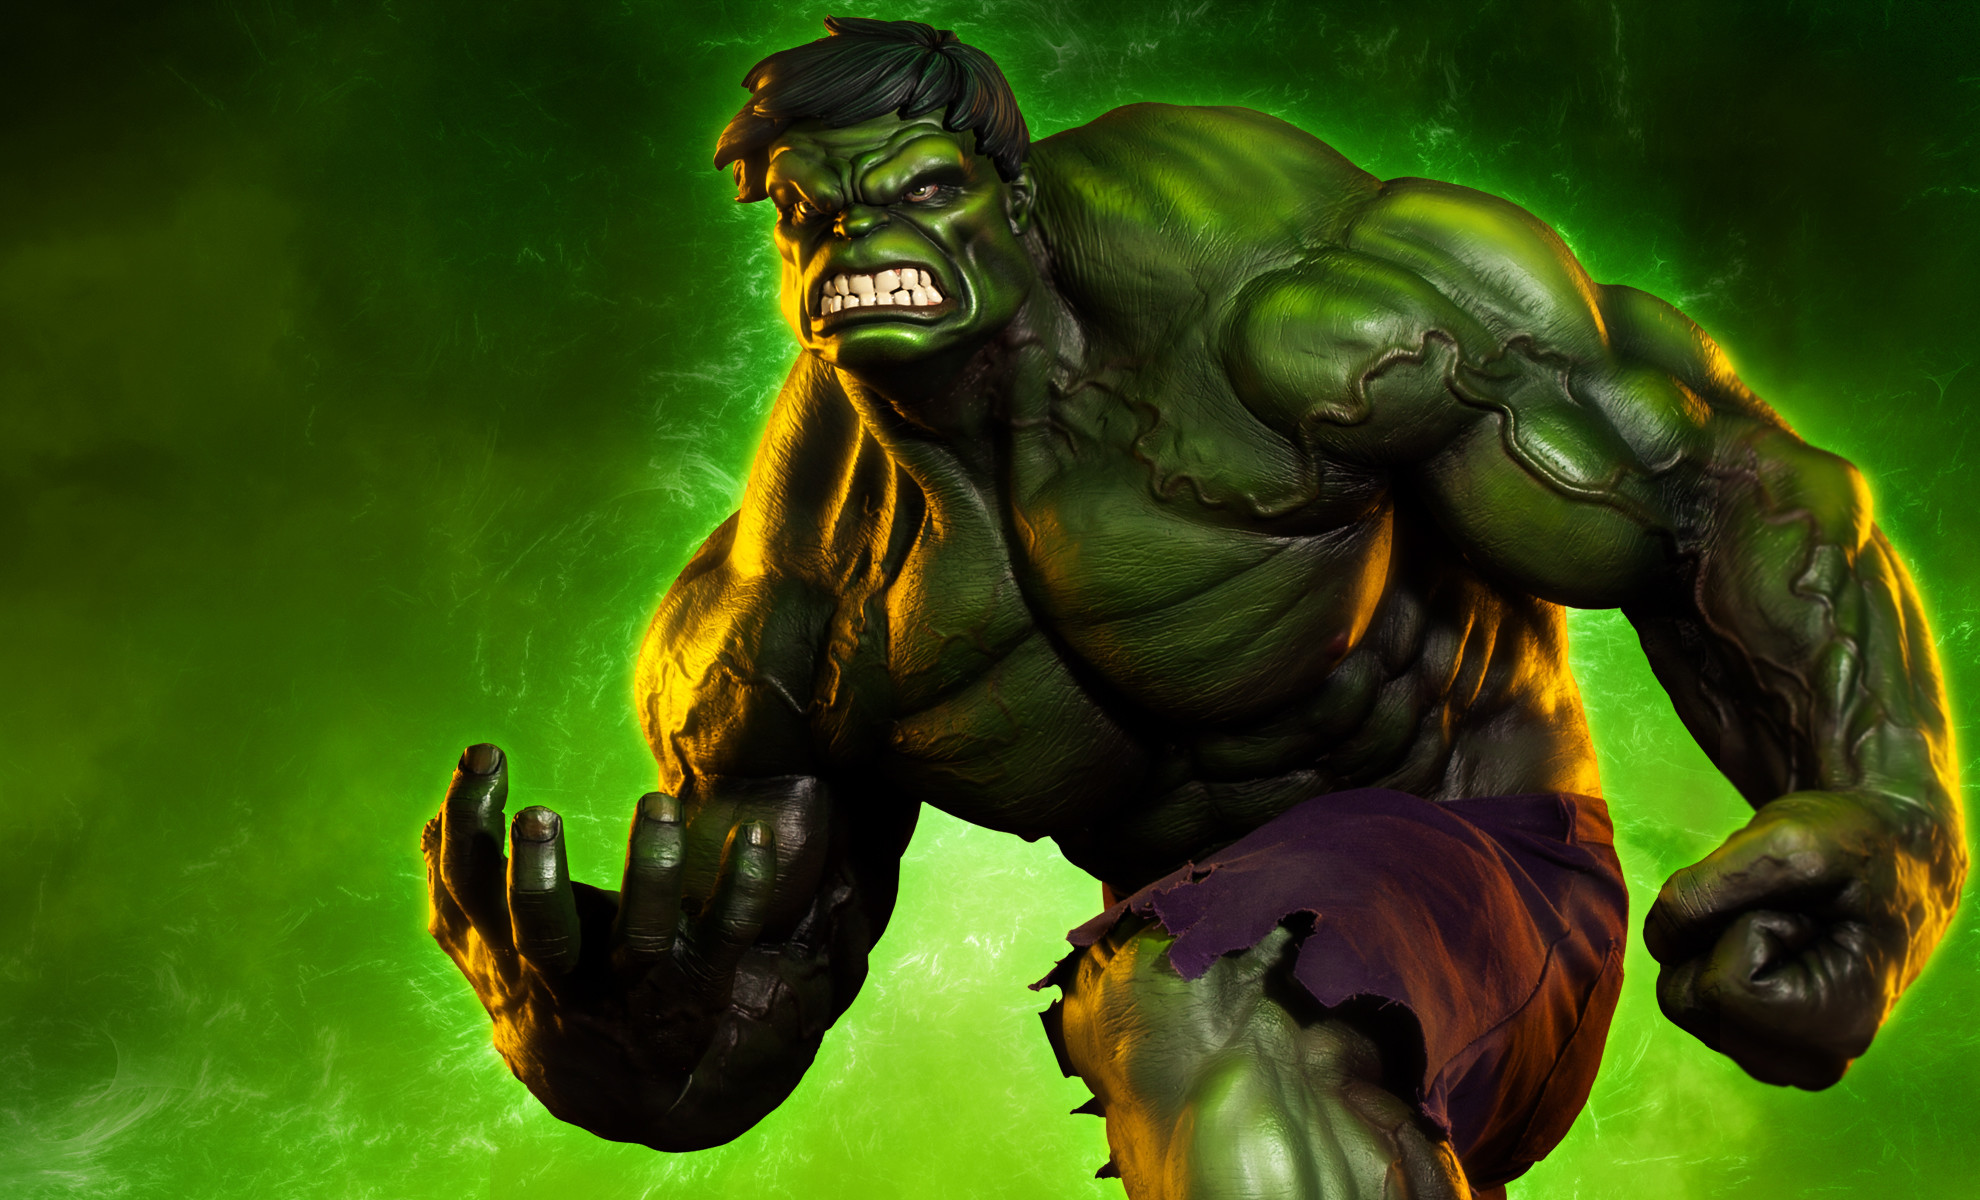 Hulk 3d Wallpaper For Android Image Num 49